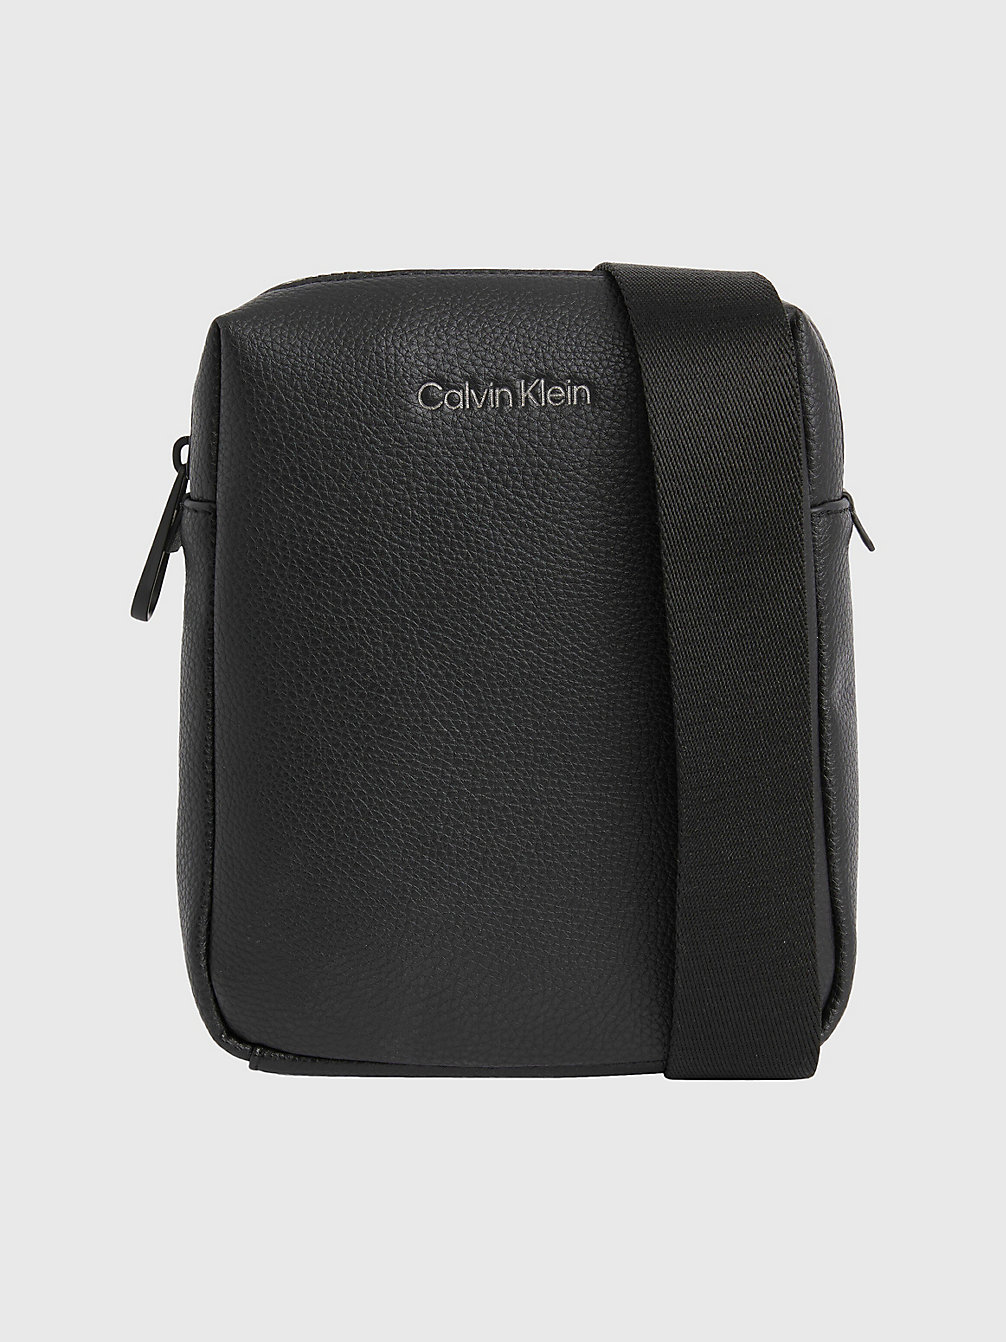 CK BLACK Small Recycled Reporter Bag undefined men Calvin Klein